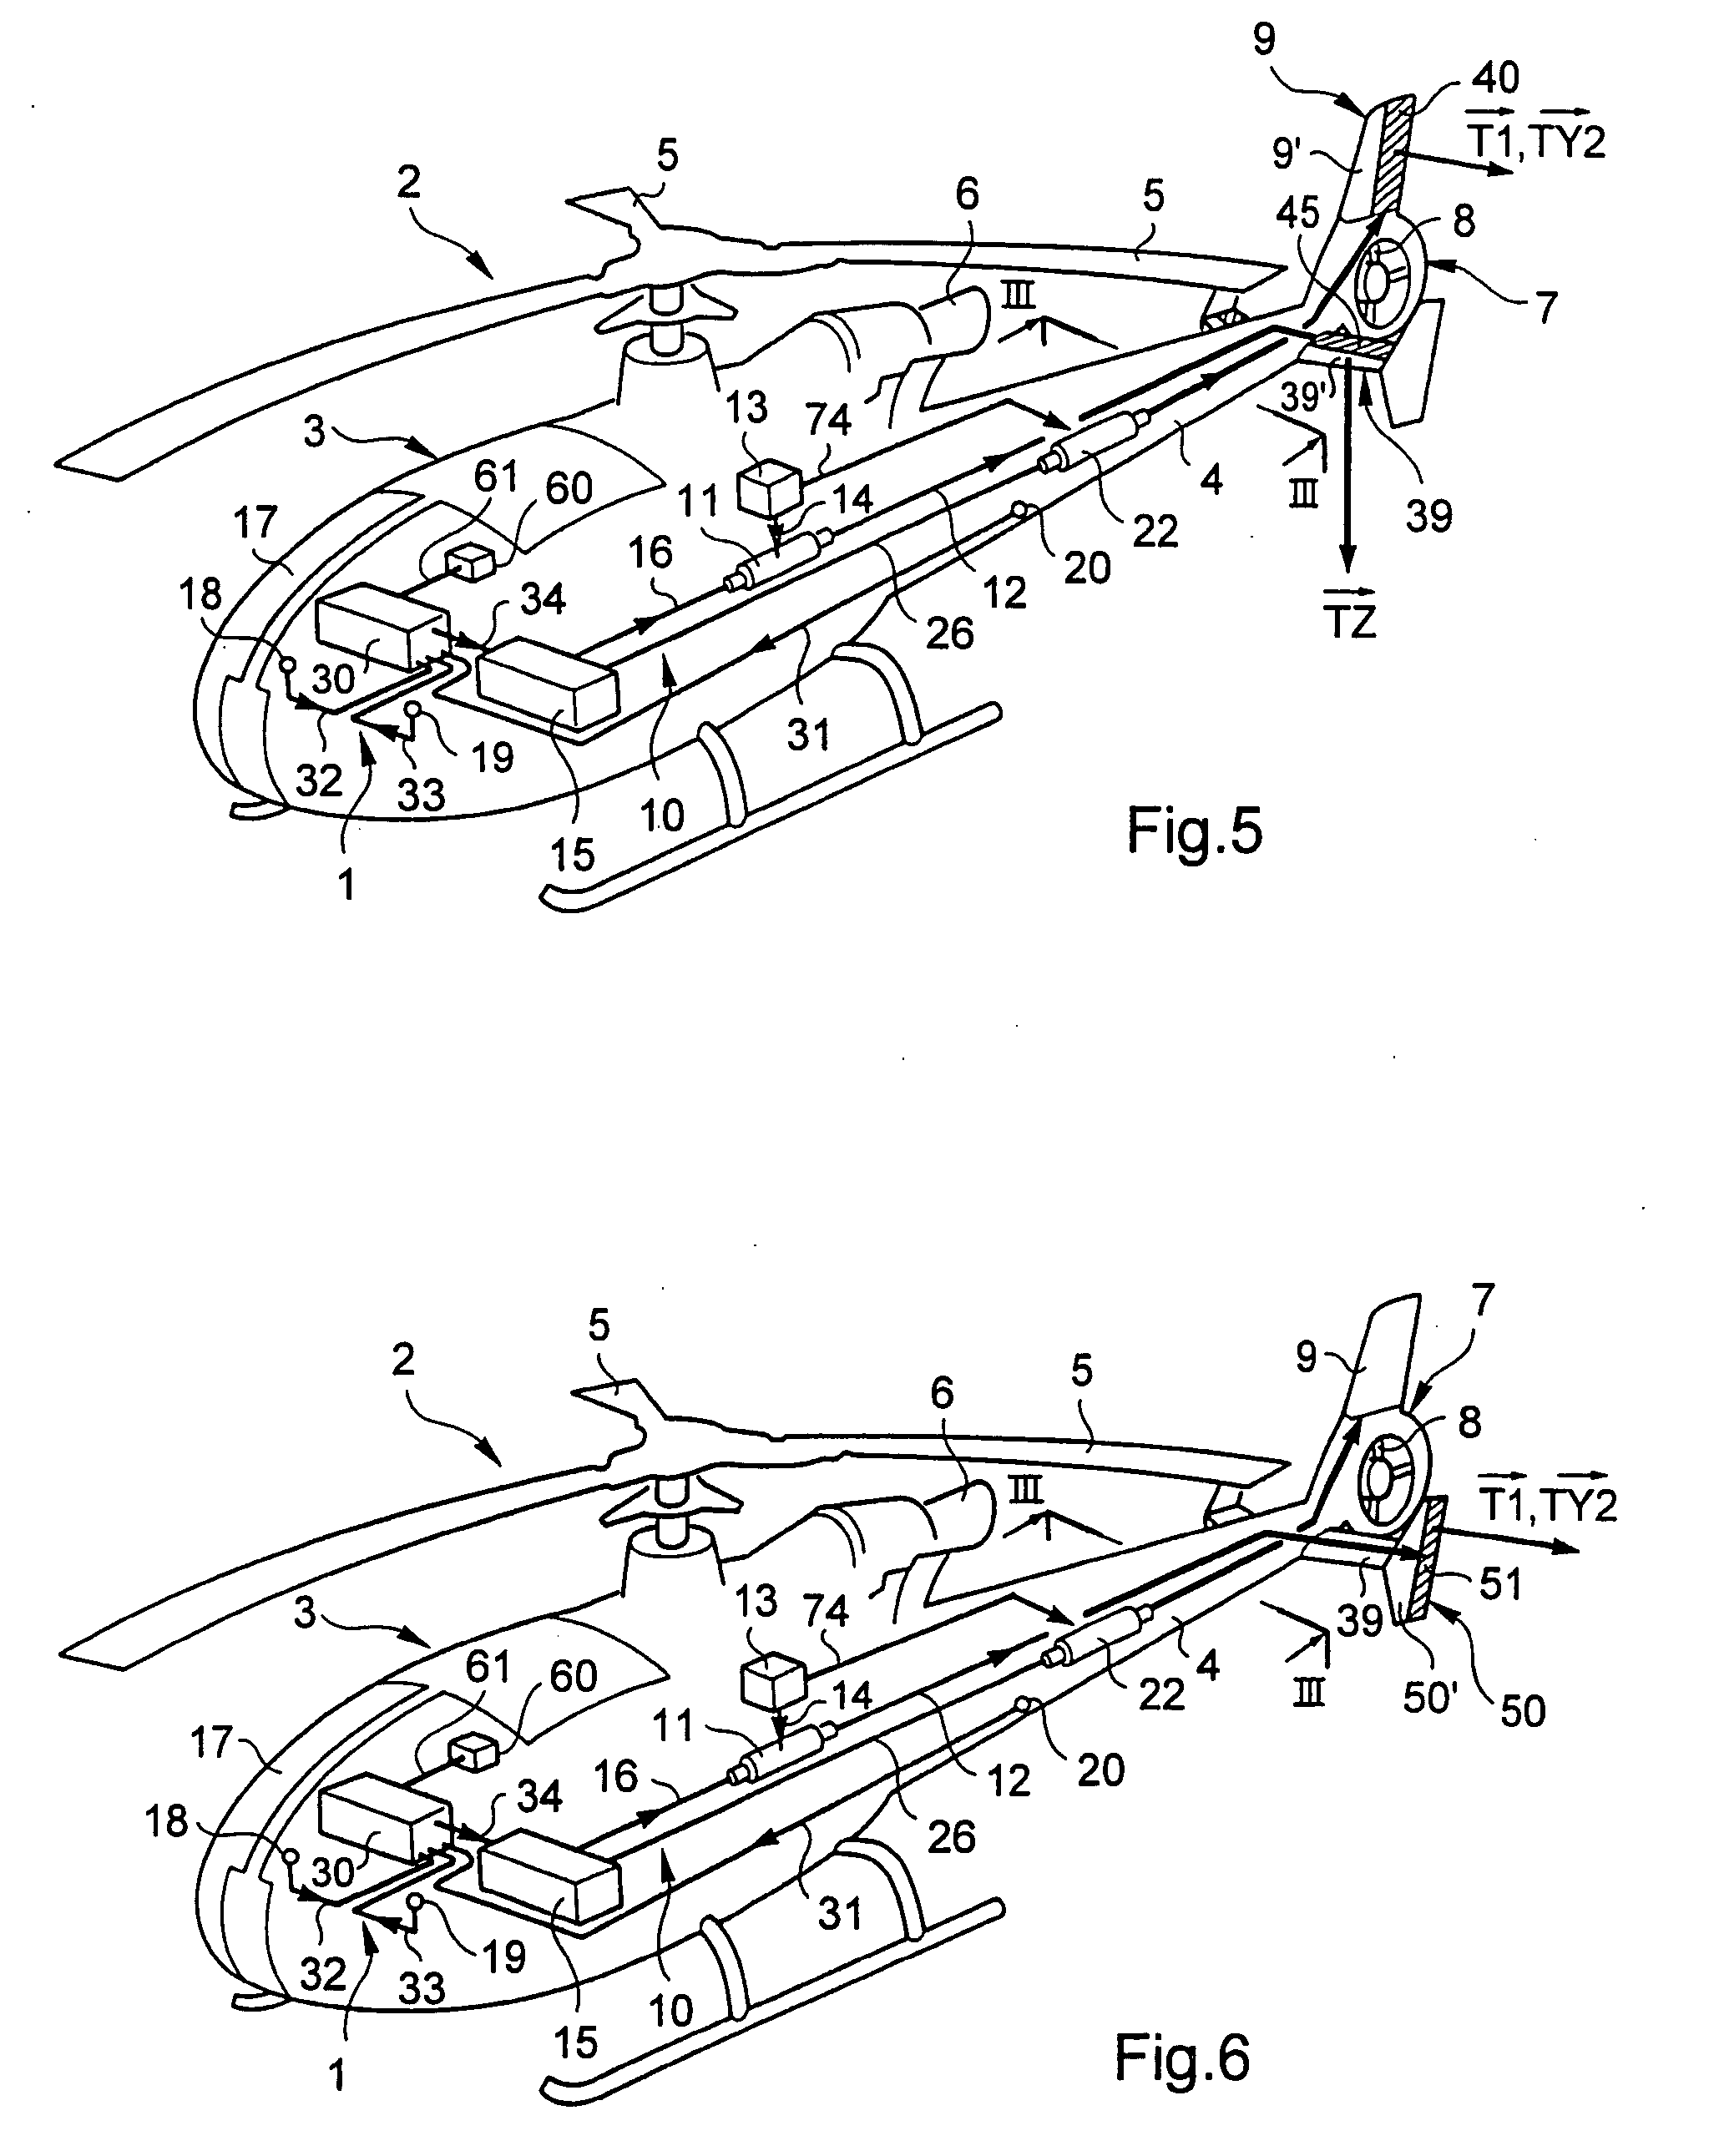 Method and a device for using a tiltable stabilizer to reduce vibration generated on the fuselage of a helicopter